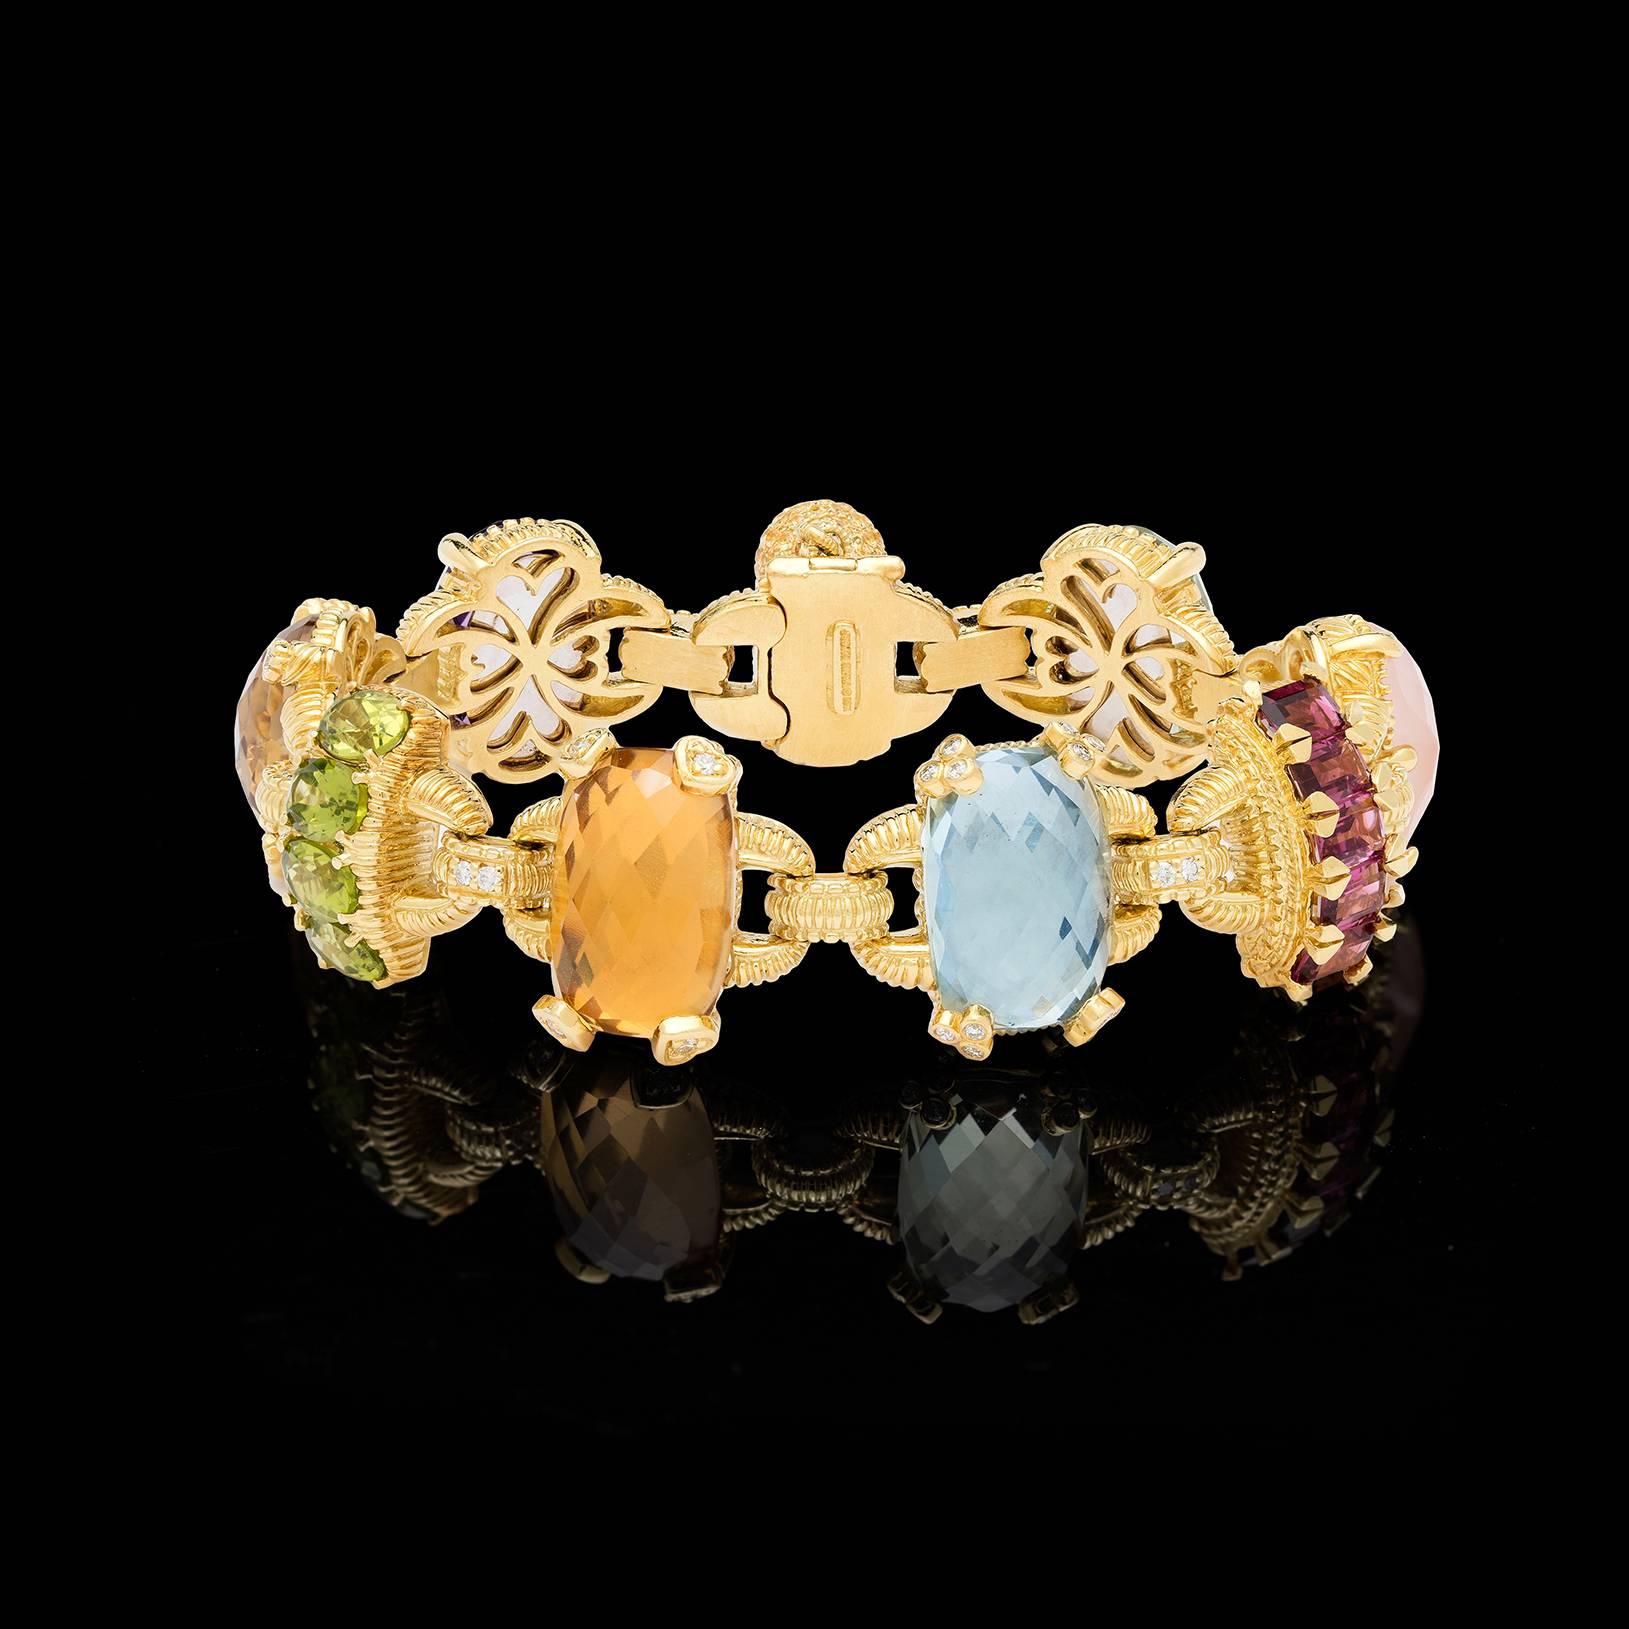 Judith Ripka 18k yellow gold Ambrosia collection bracelet features amethyst, citrine, peridot, pink tourmaline, rose quartz, tsavorite, and prasiolite gems. Detailed with Judith Ripka's signature textured gold finish and diamonds set in the prongs.